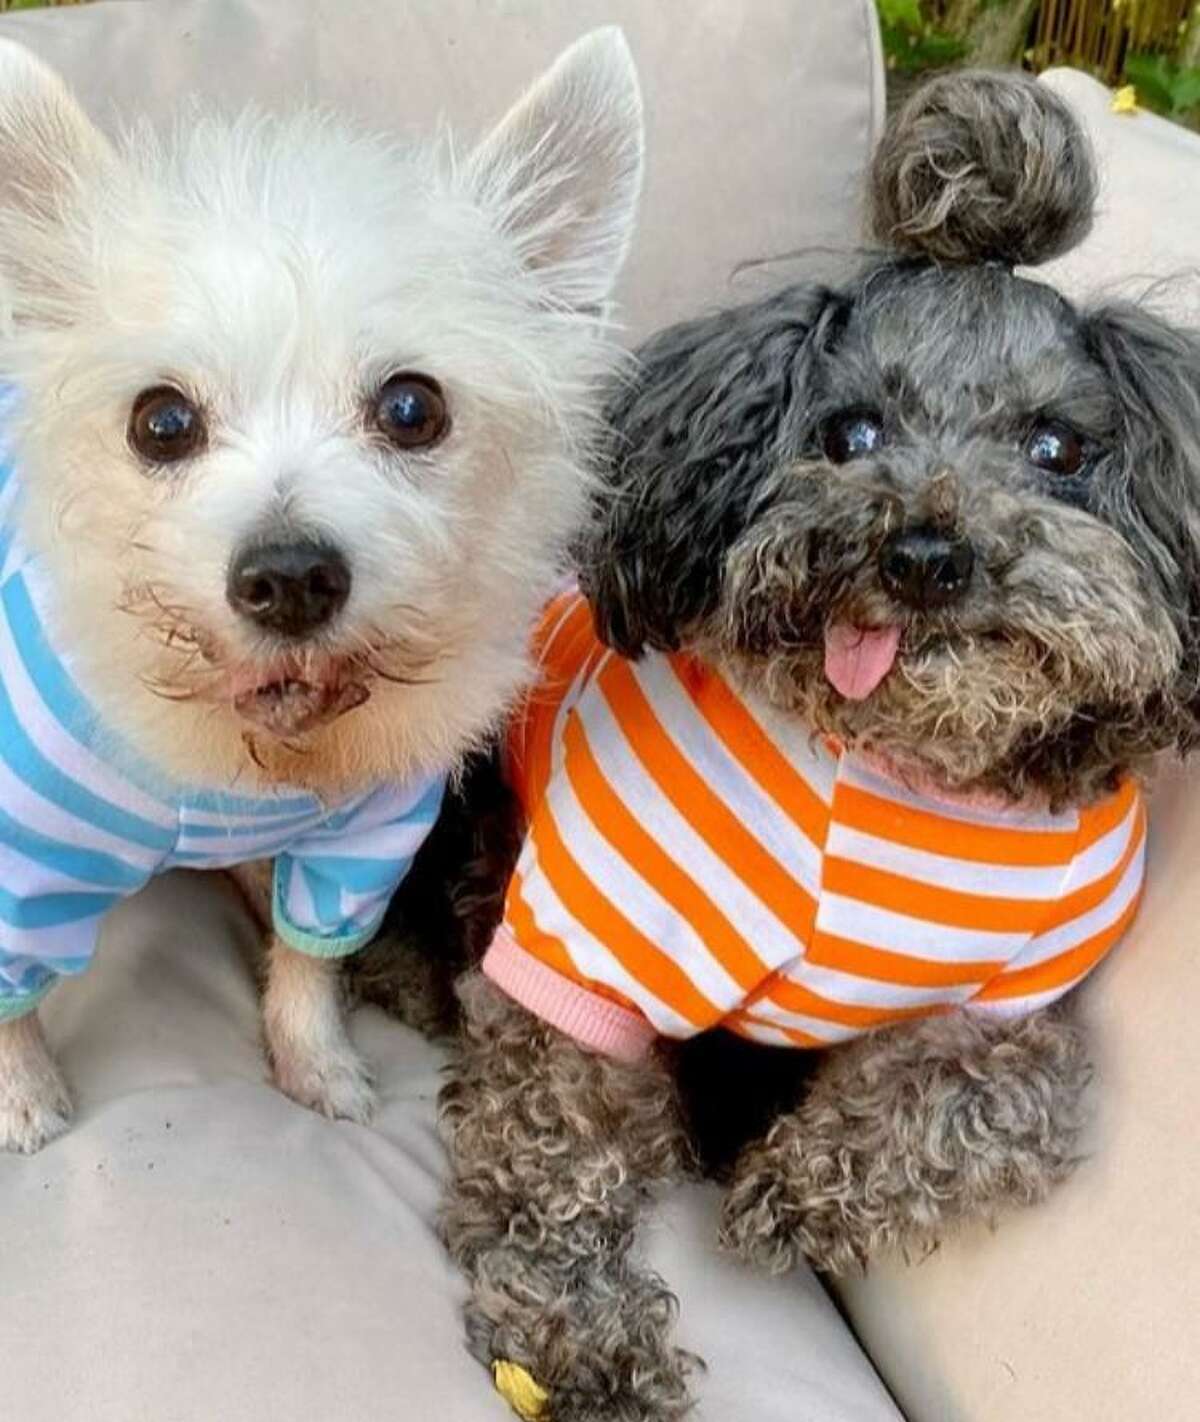 Two of Liz Harris' dogs, Rooney, 15, a Maltese, and Aldous, 17, a toy .